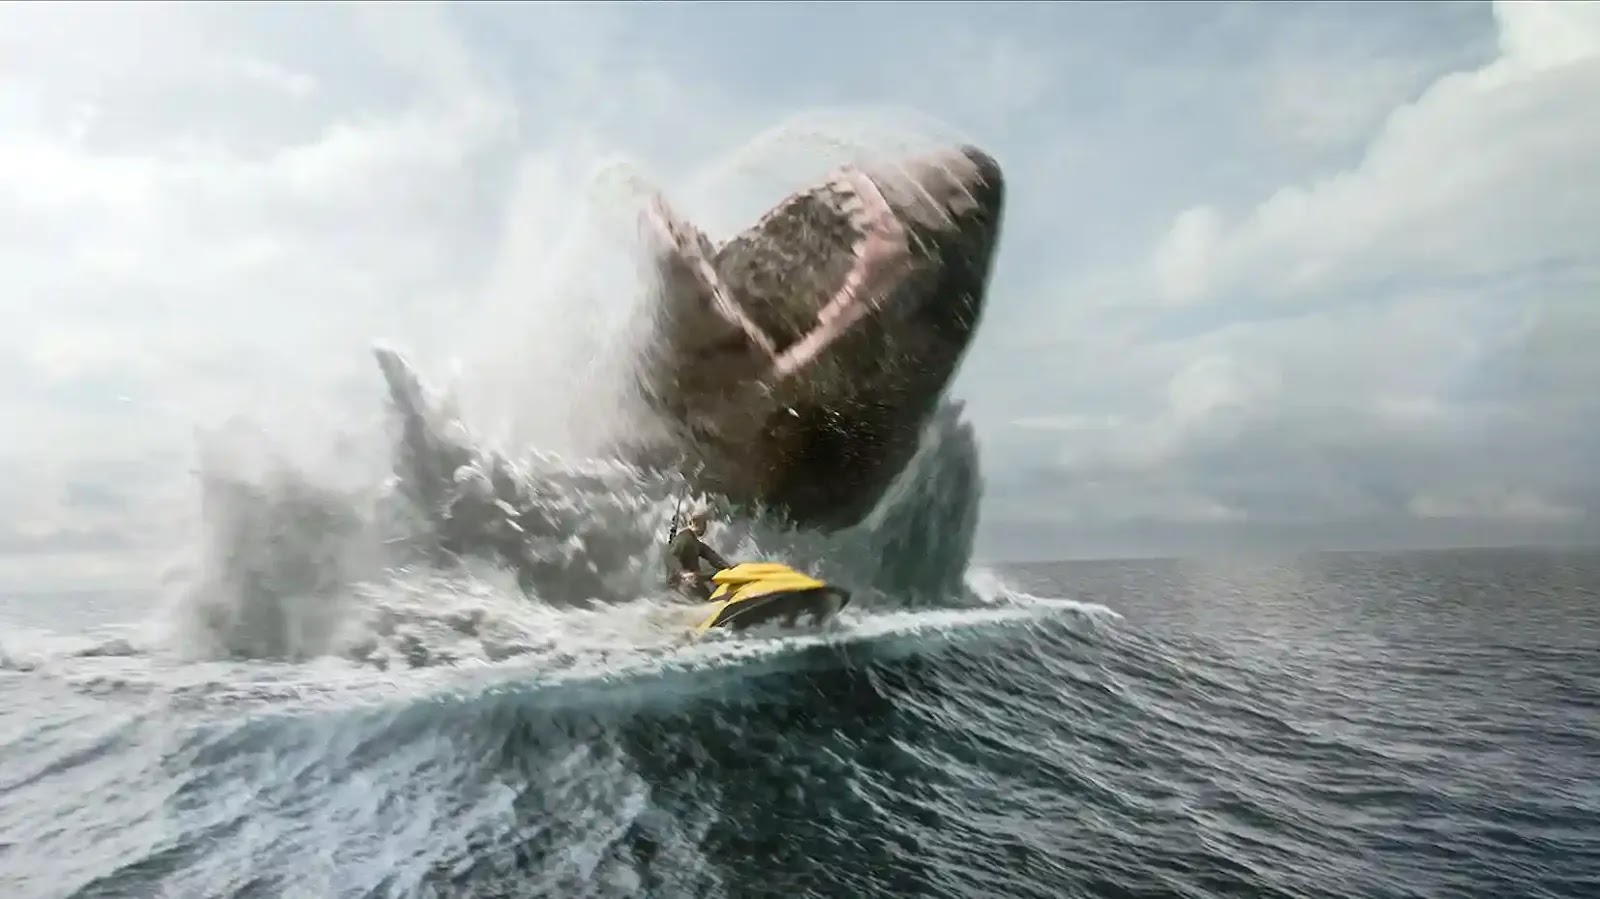 the meg 2: the trench screenshots